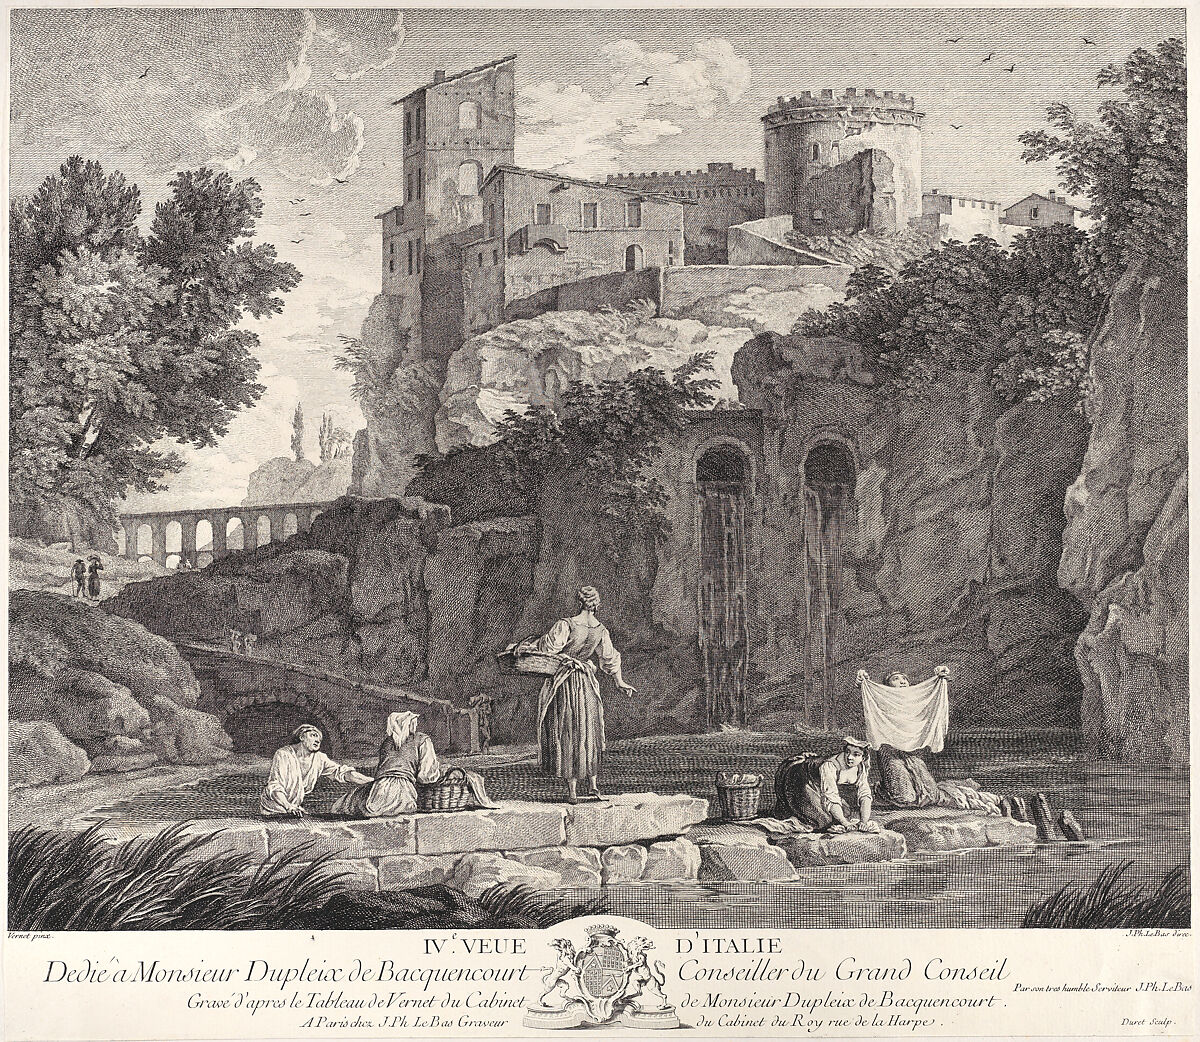 Fourth View of Italy, After Joseph Vernet (French, Avignon 1714–1789 Paris), Engraving; first state of two 